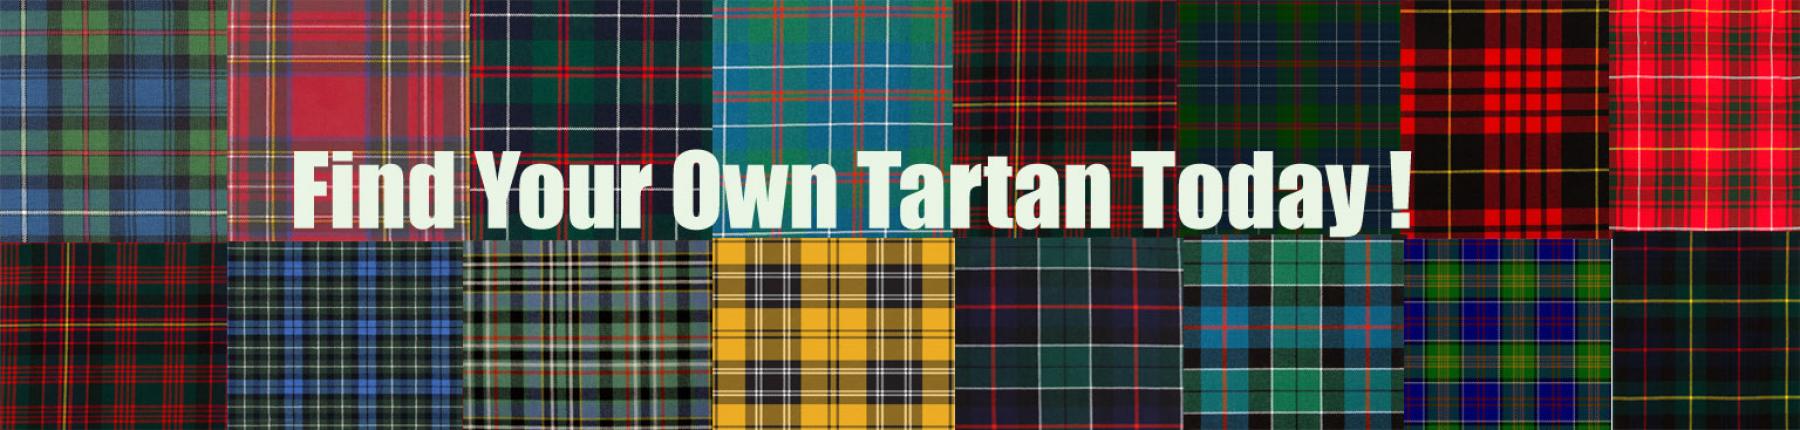 Find Your Own Tartan Today!